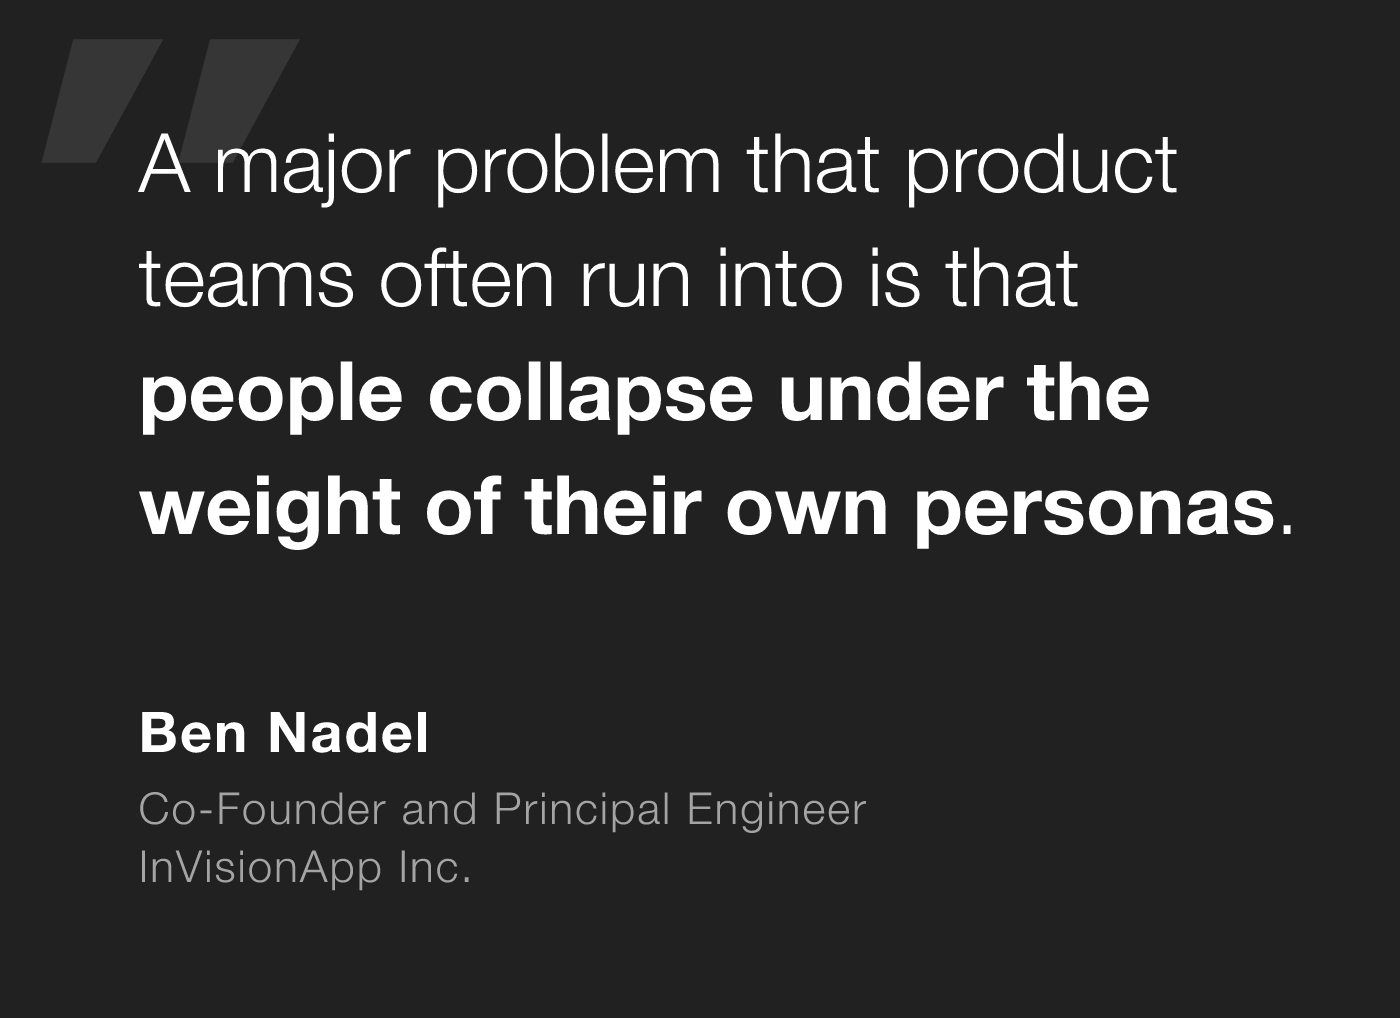 A major problem that product teams often run into is that people collapse under the weight of their own personas. - Ben Nadel